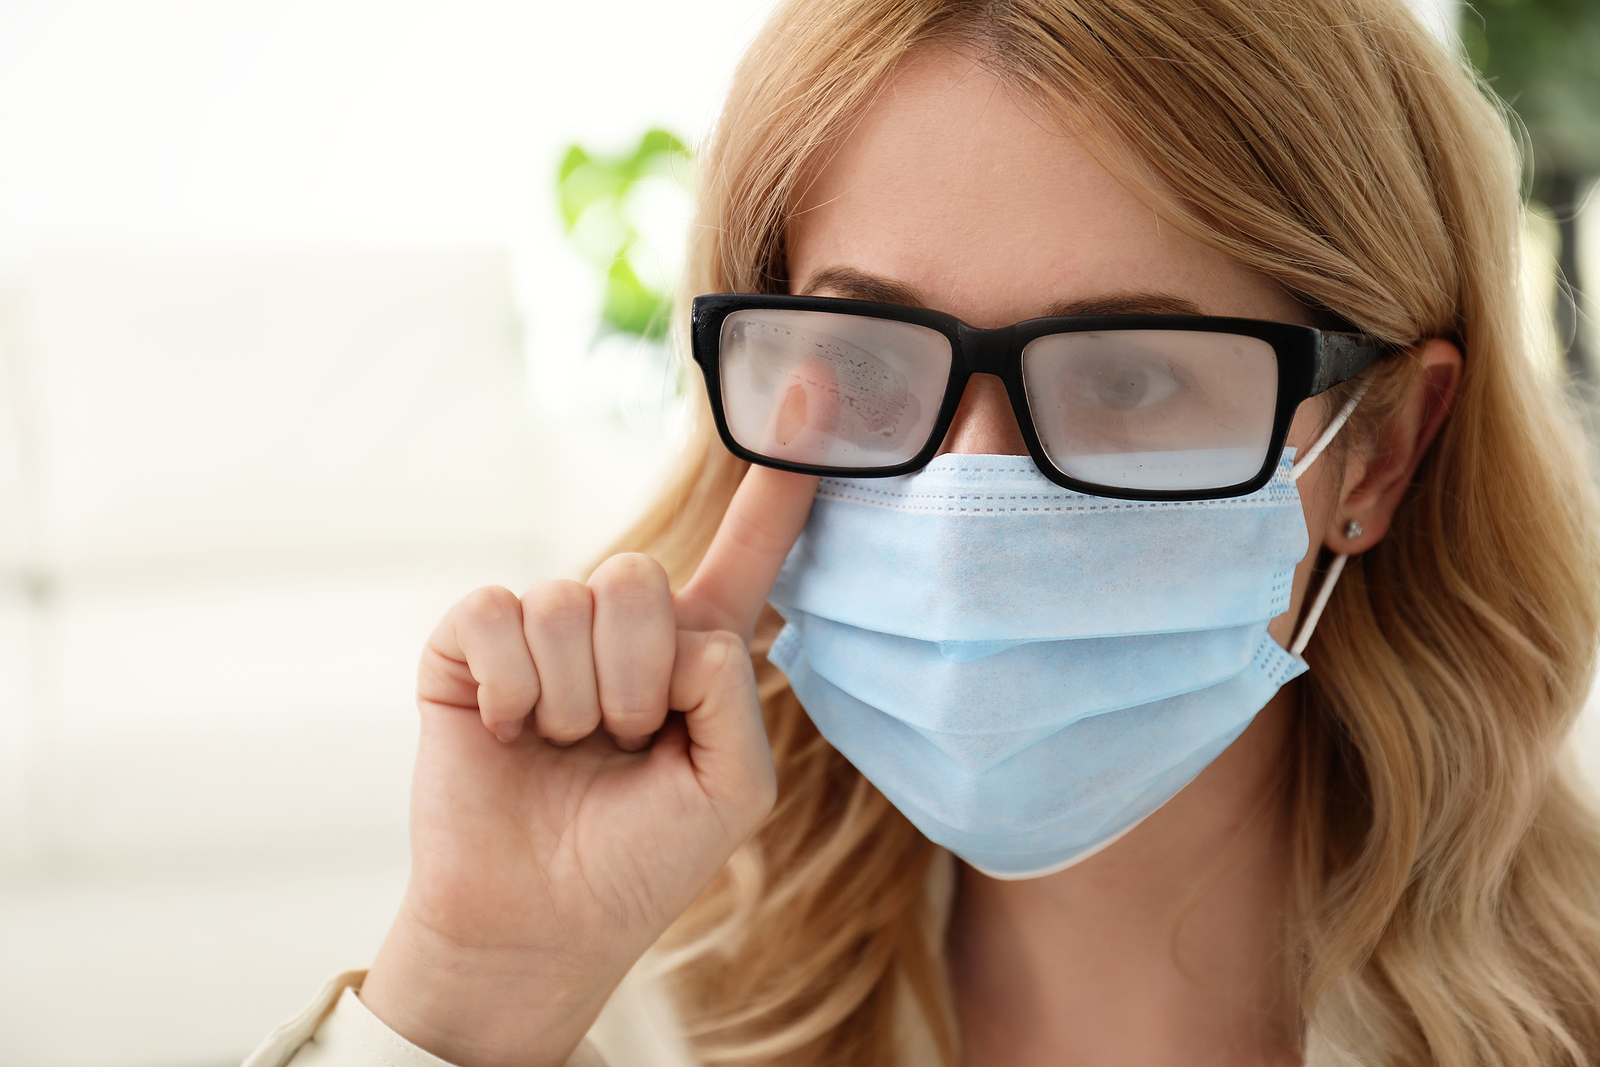 Woman wiping foggy glasses caused by wearing medical mask indoors, closeup